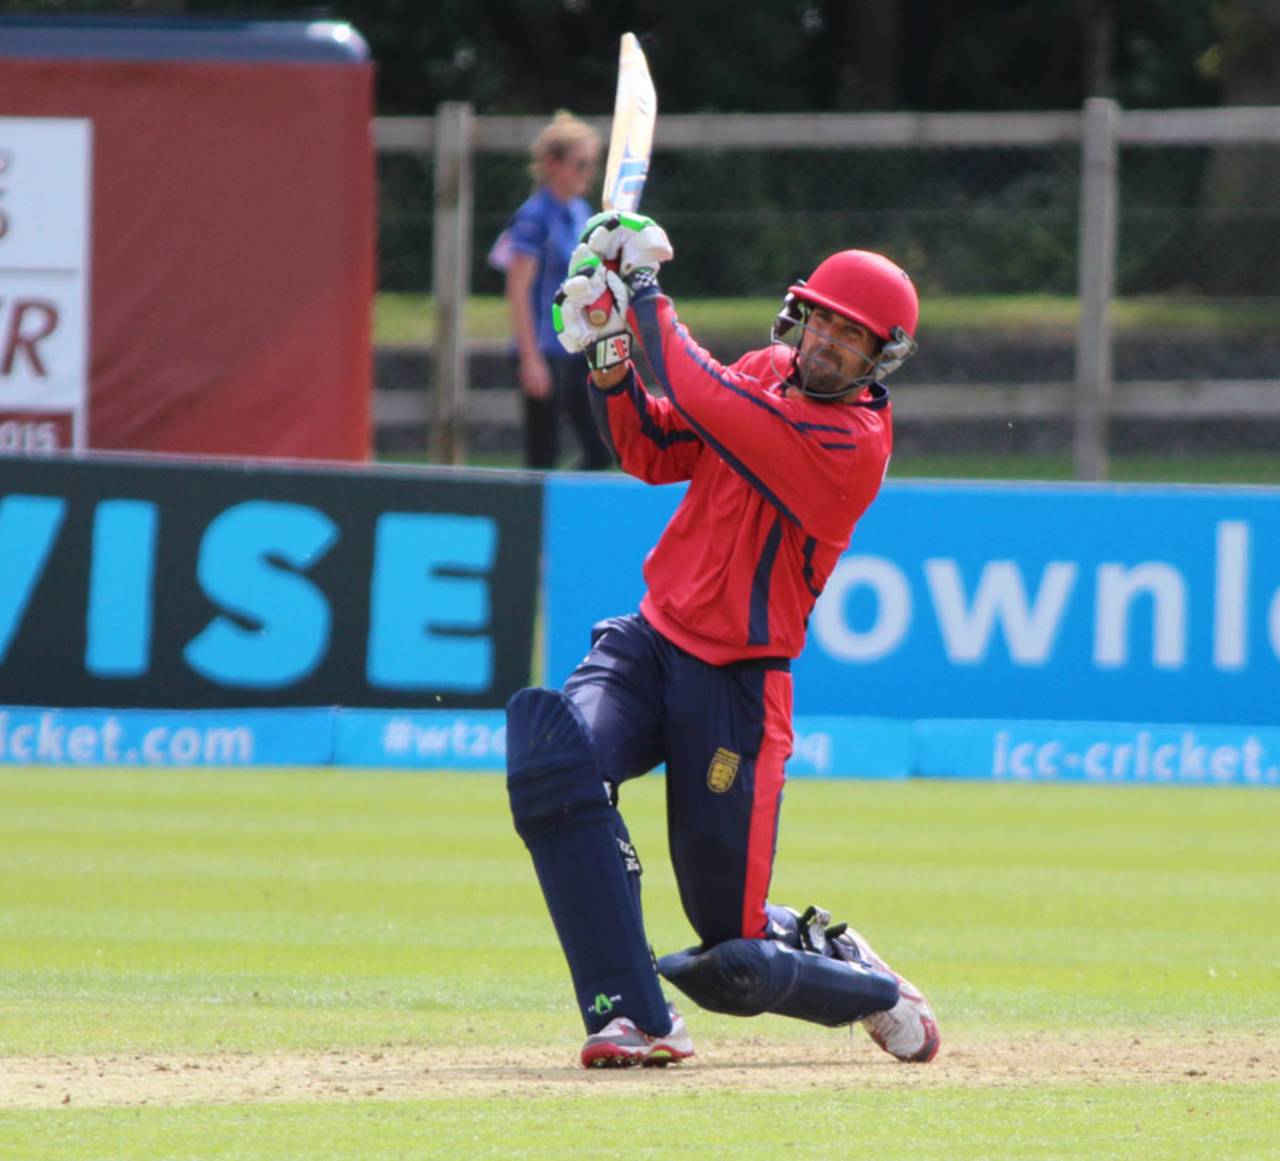 Peter Gough: "The most satisfying thing is that we're learning and that we're trying to get better. The T20 Qualifier last year was a huge thing for us."&nbsp;&nbsp;&bull;&nbsp;&nbsp;Peter Della Penna